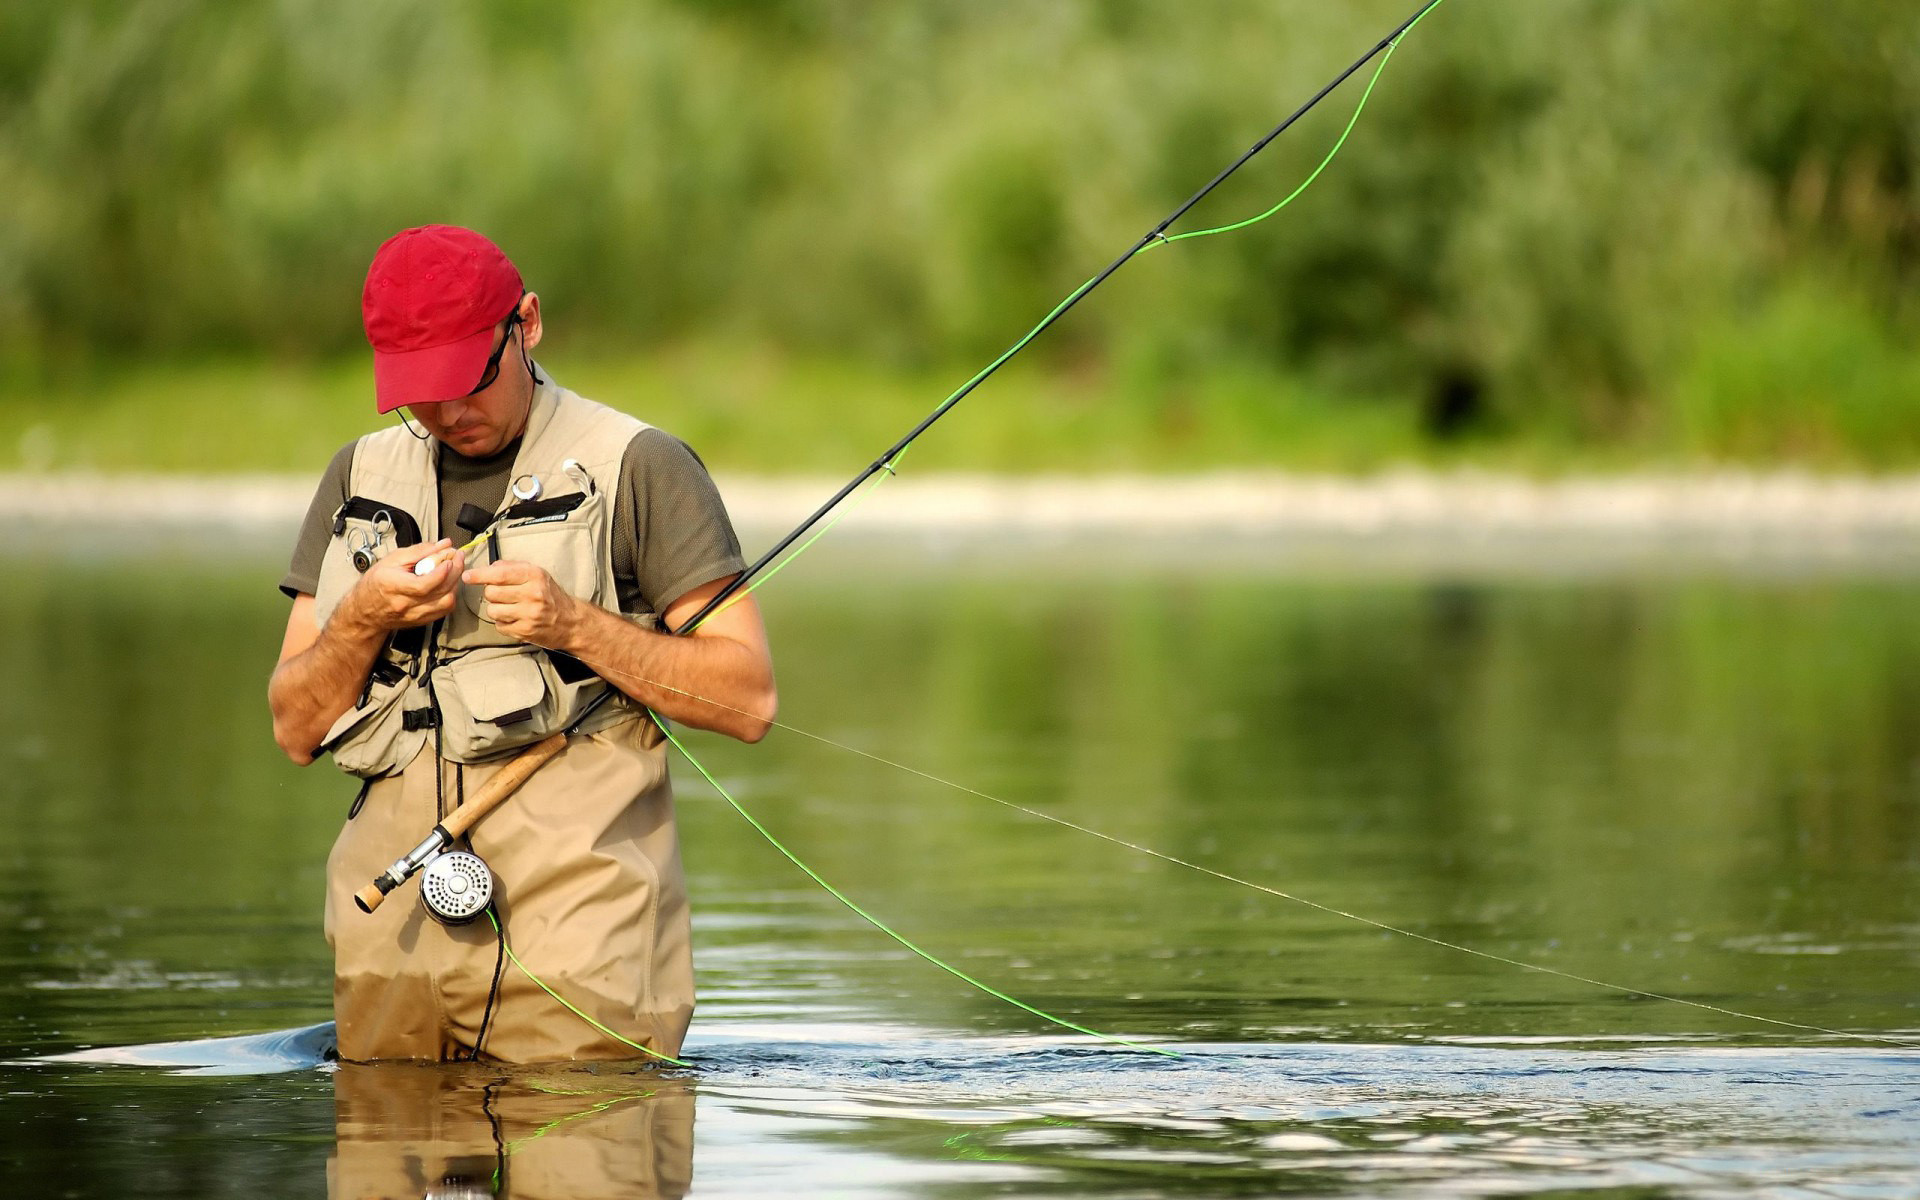 Collection of Fly Fishing Desktop Backgrounds on Spyder Wallpapers  1280Ã1024 Fishing Wallpapers (46